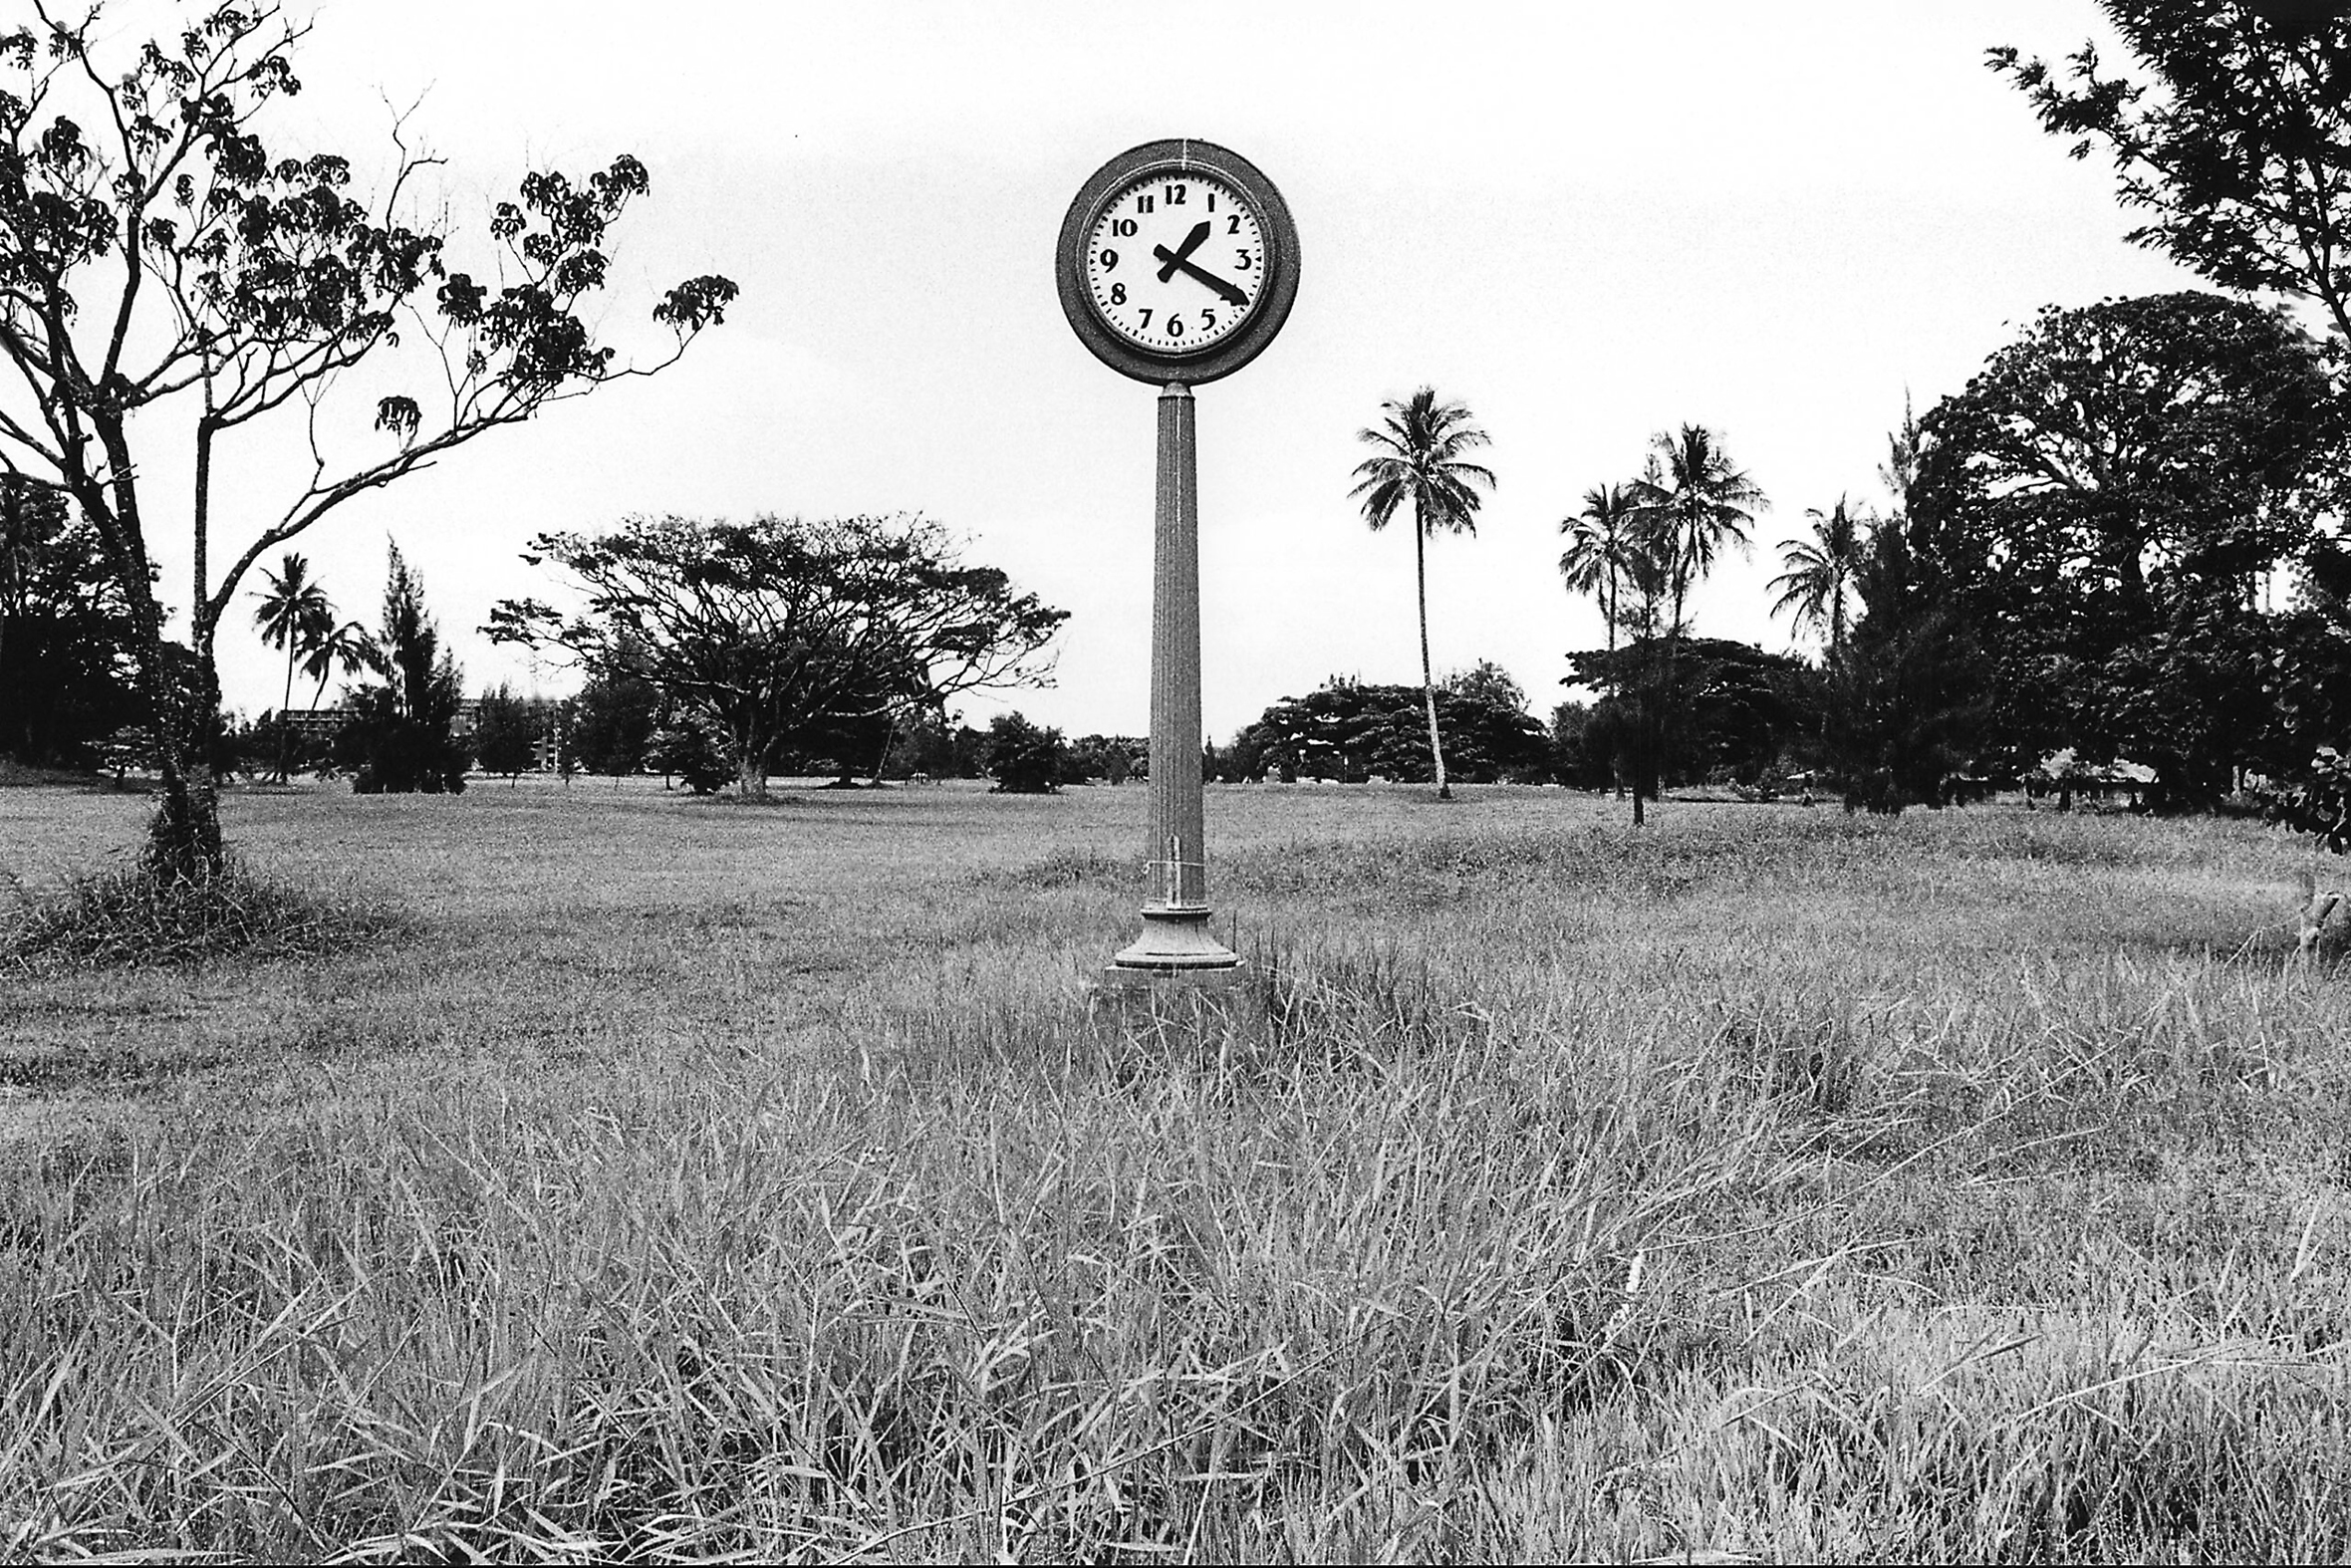 A large field with high, dry grass and open areas interspersed with trees, including palm trees and  a very tall, large, pedestal clock reading 1:20.